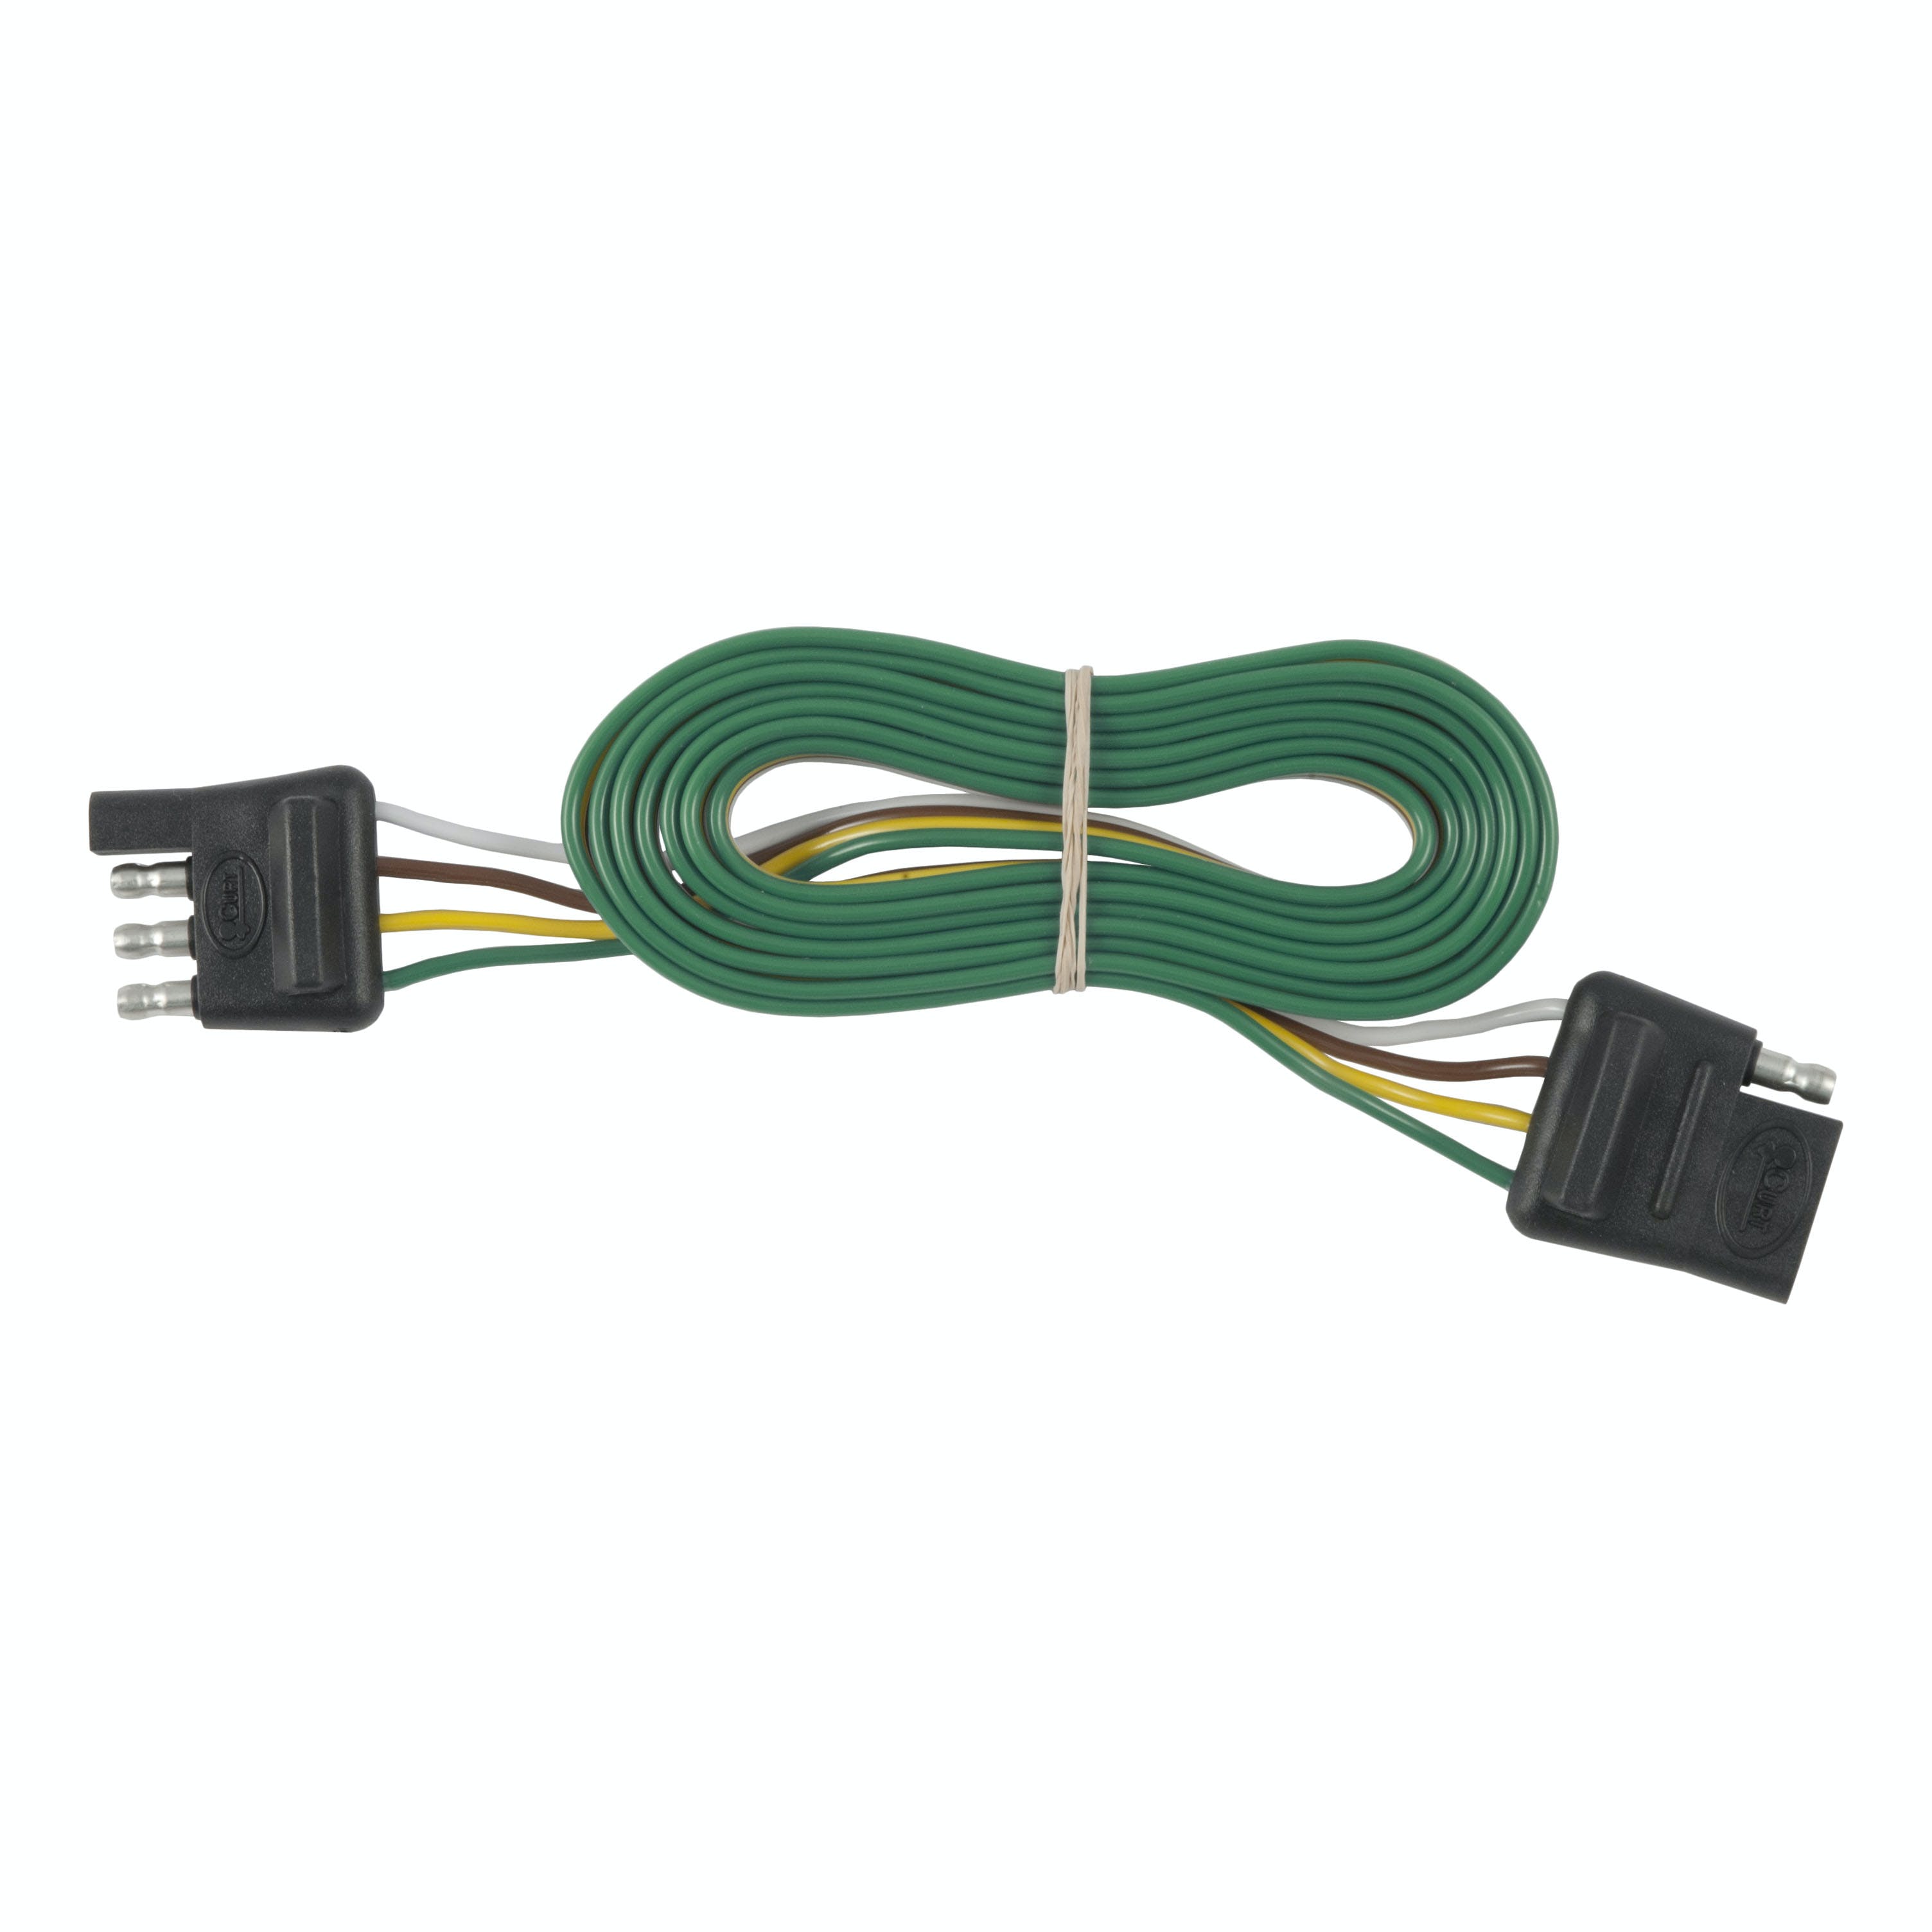 CURT 58050 4-Way Flat Connector Plug and Socket with 72 Wires